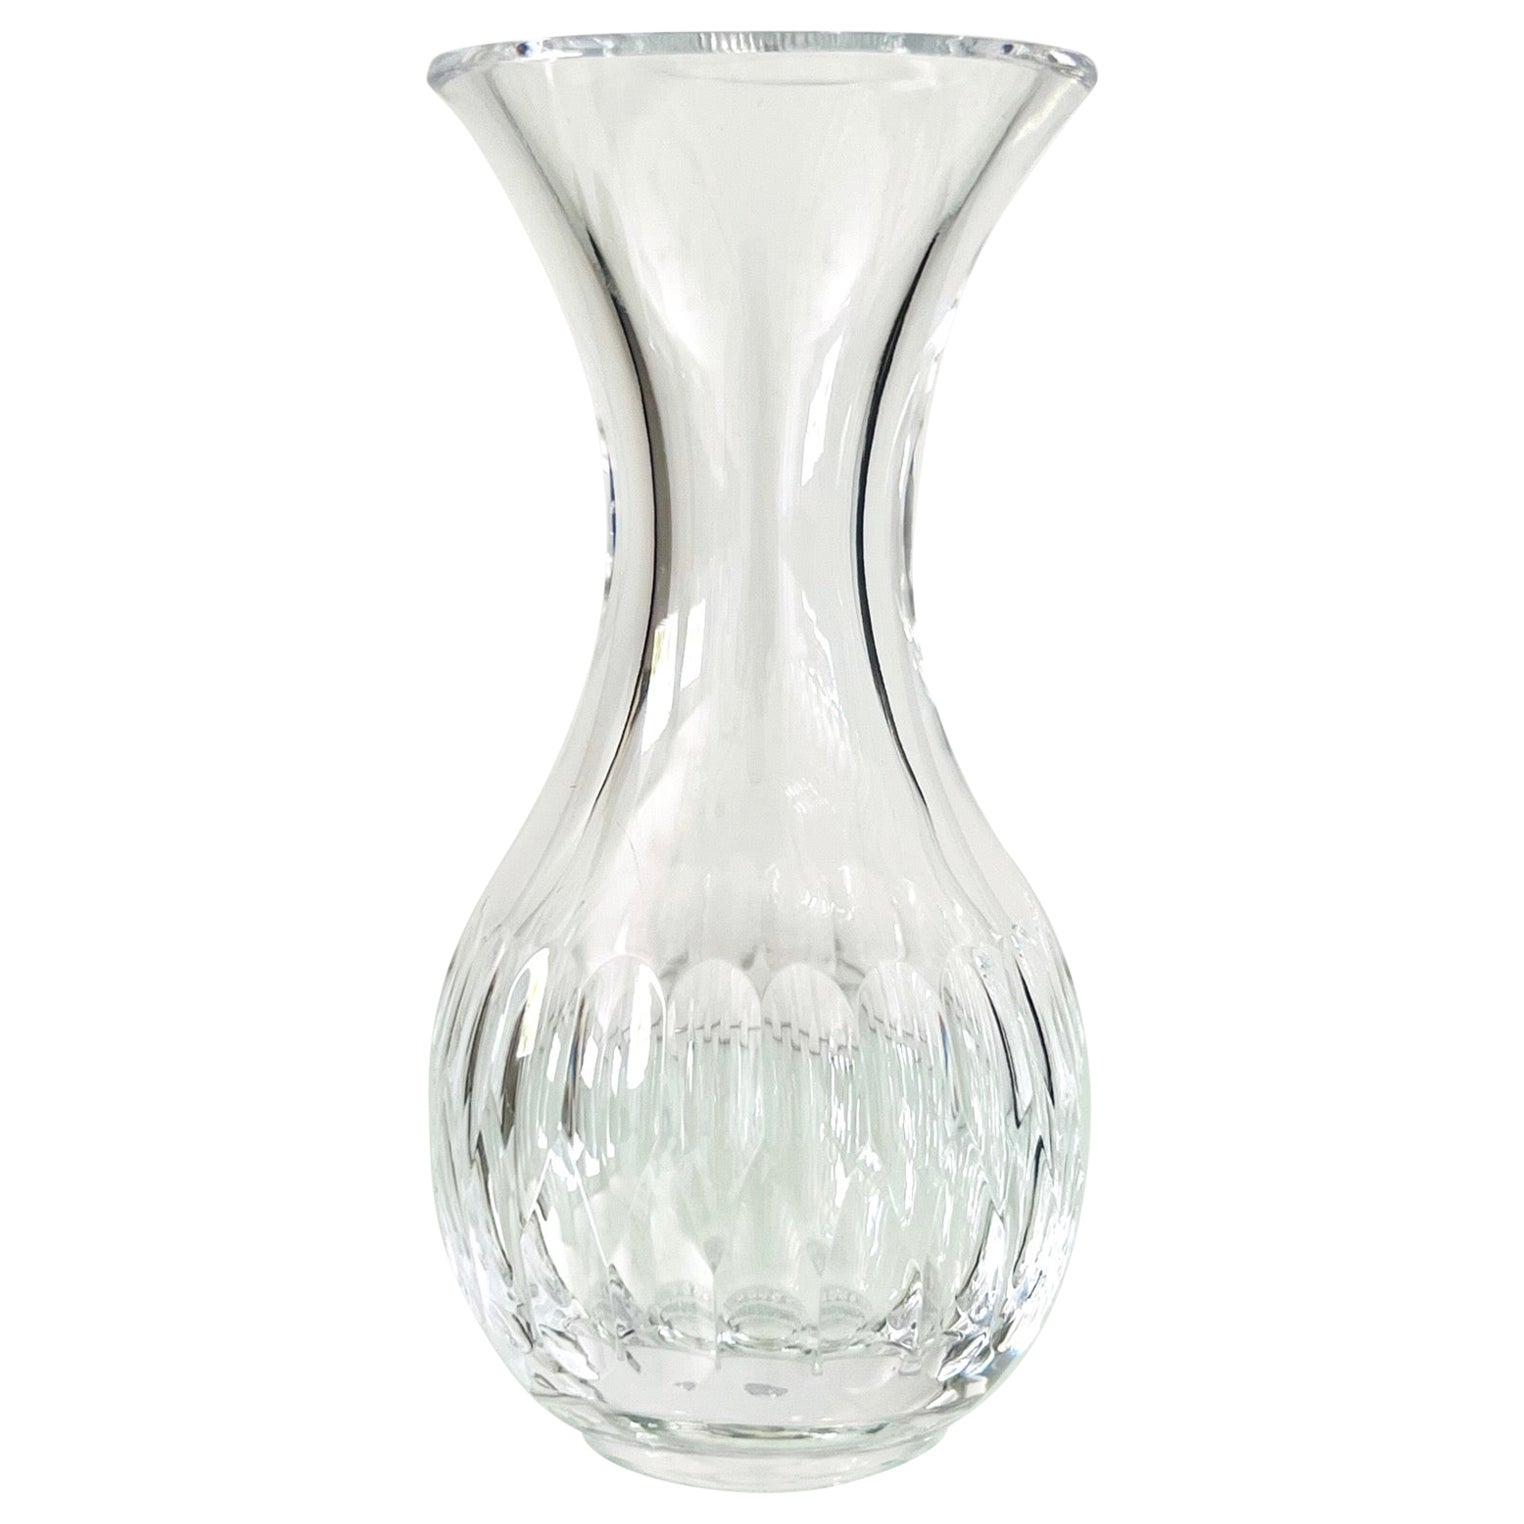 Vintage Waterford Crystal Carafe with Faceted Design, C. 1985 For Sale